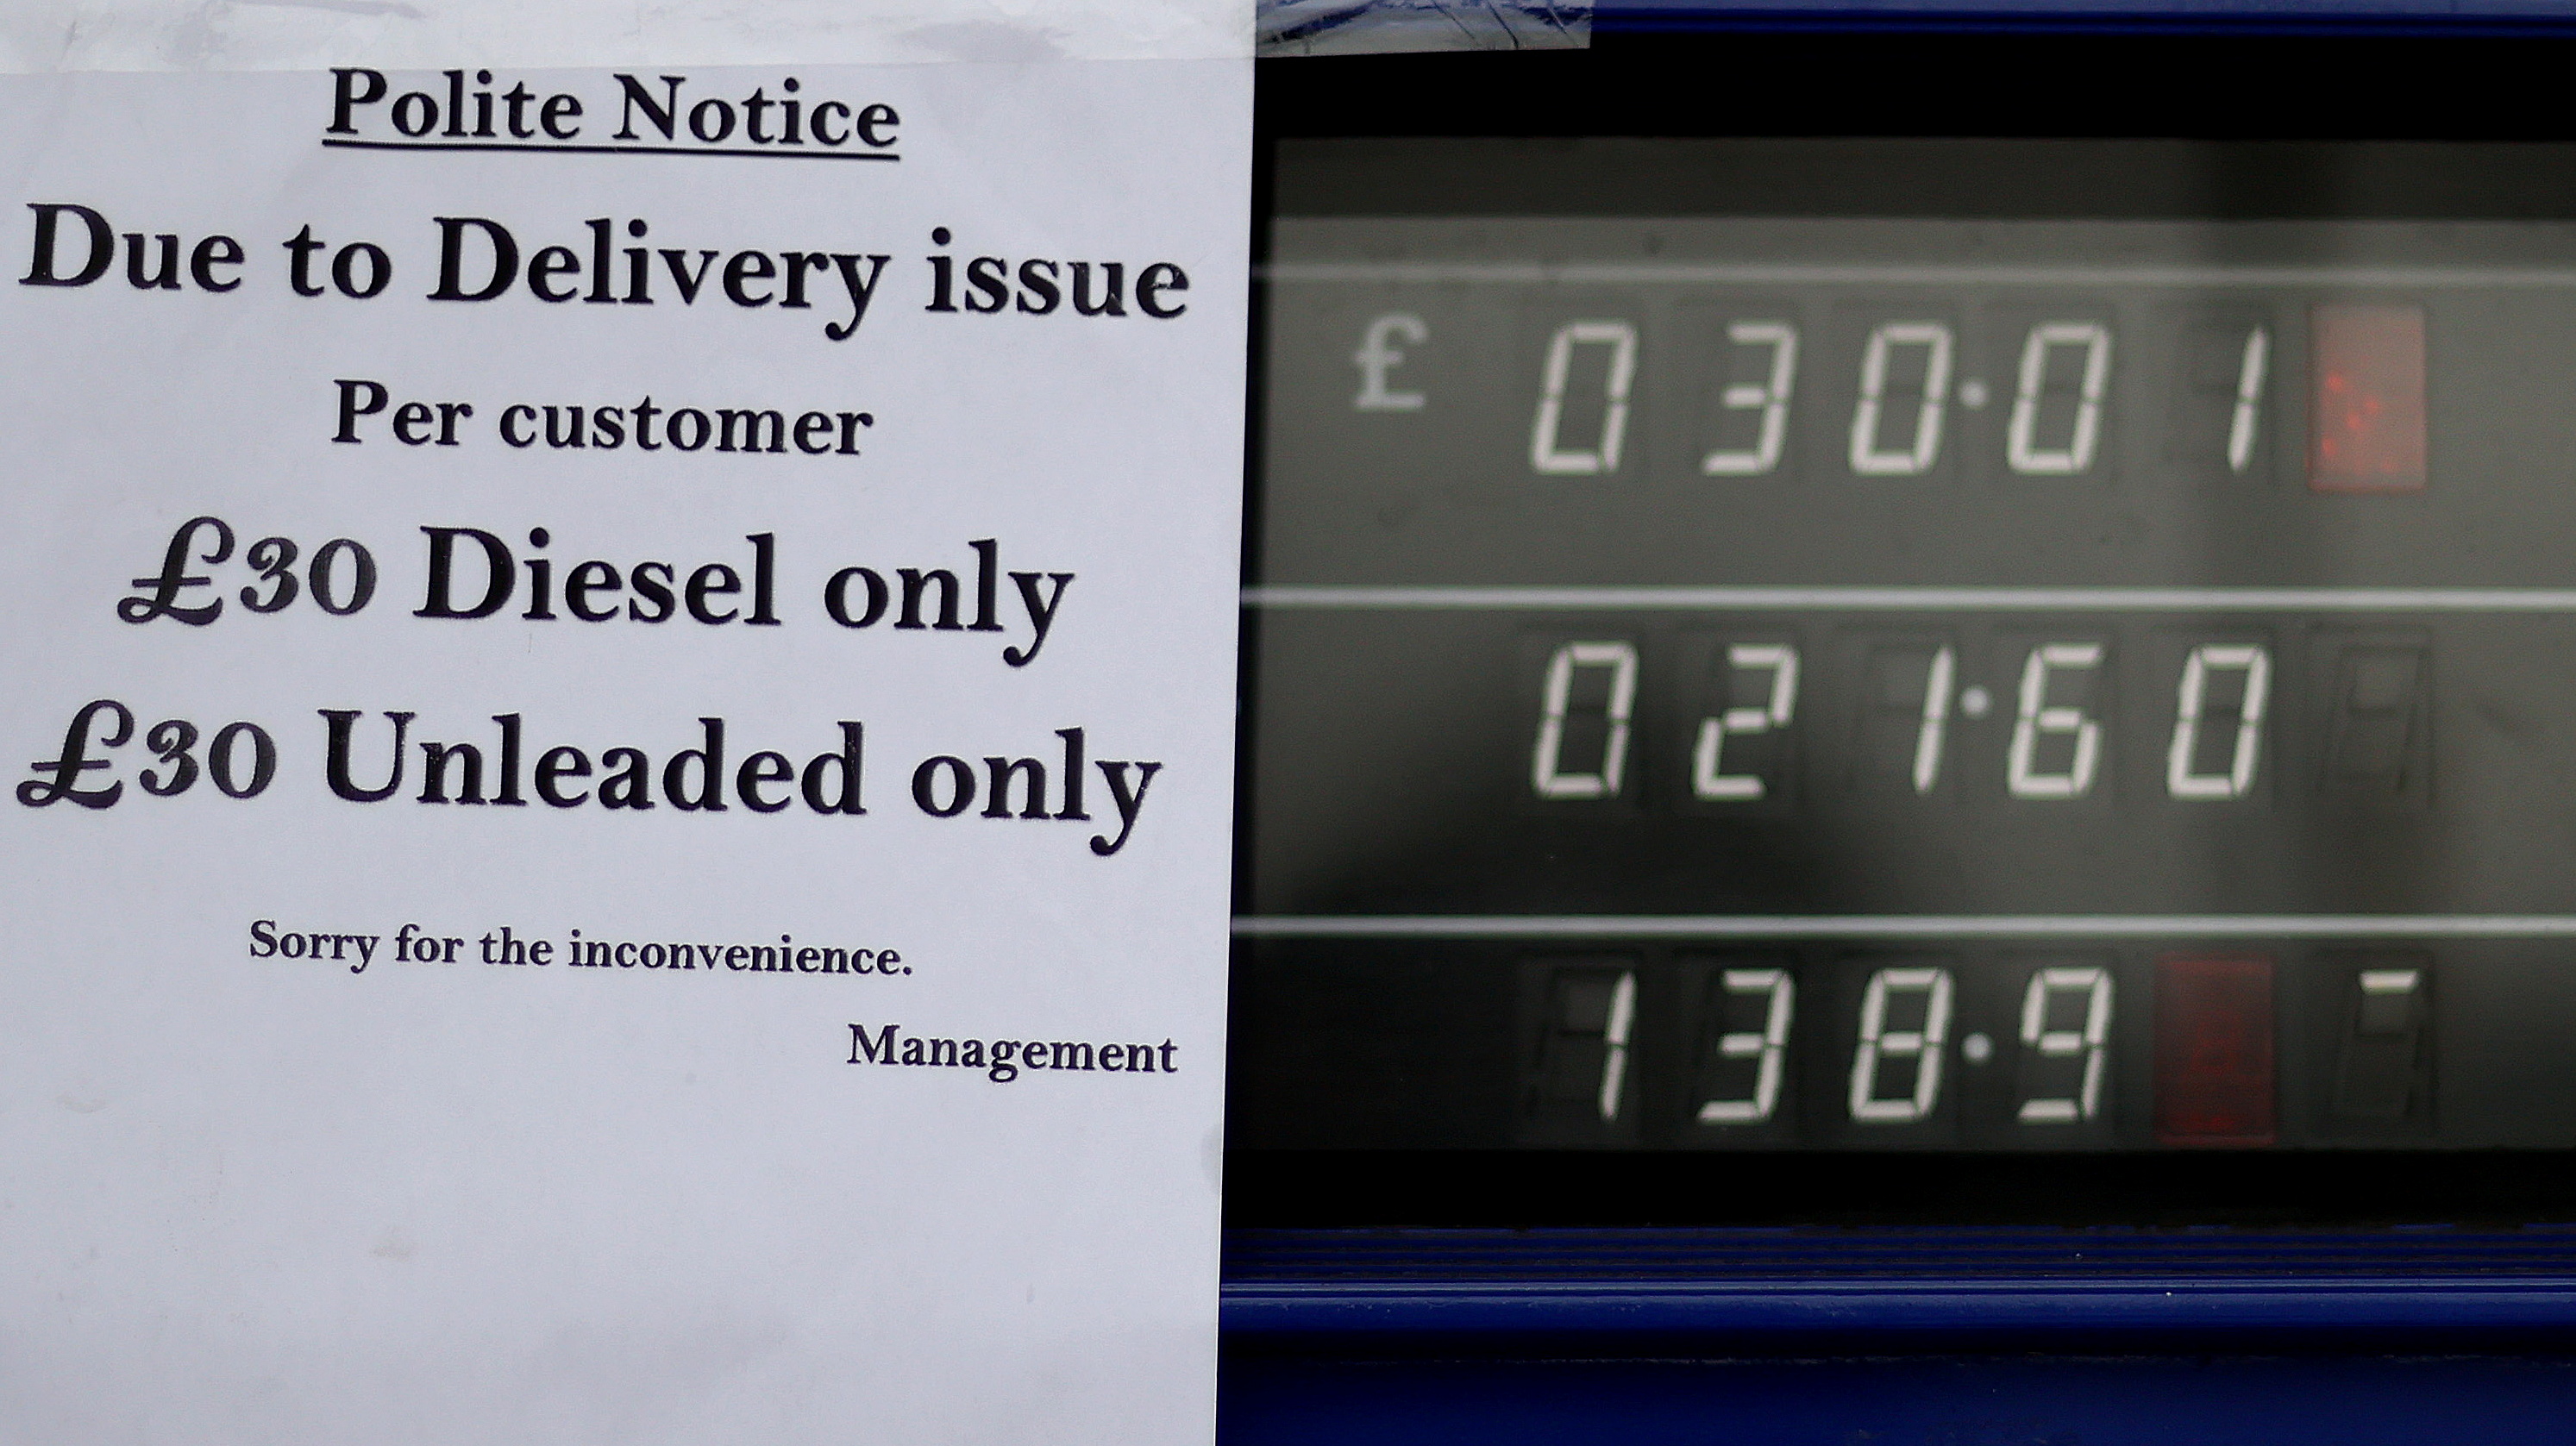 A sign shows customers that fuel has run out at a petrol station